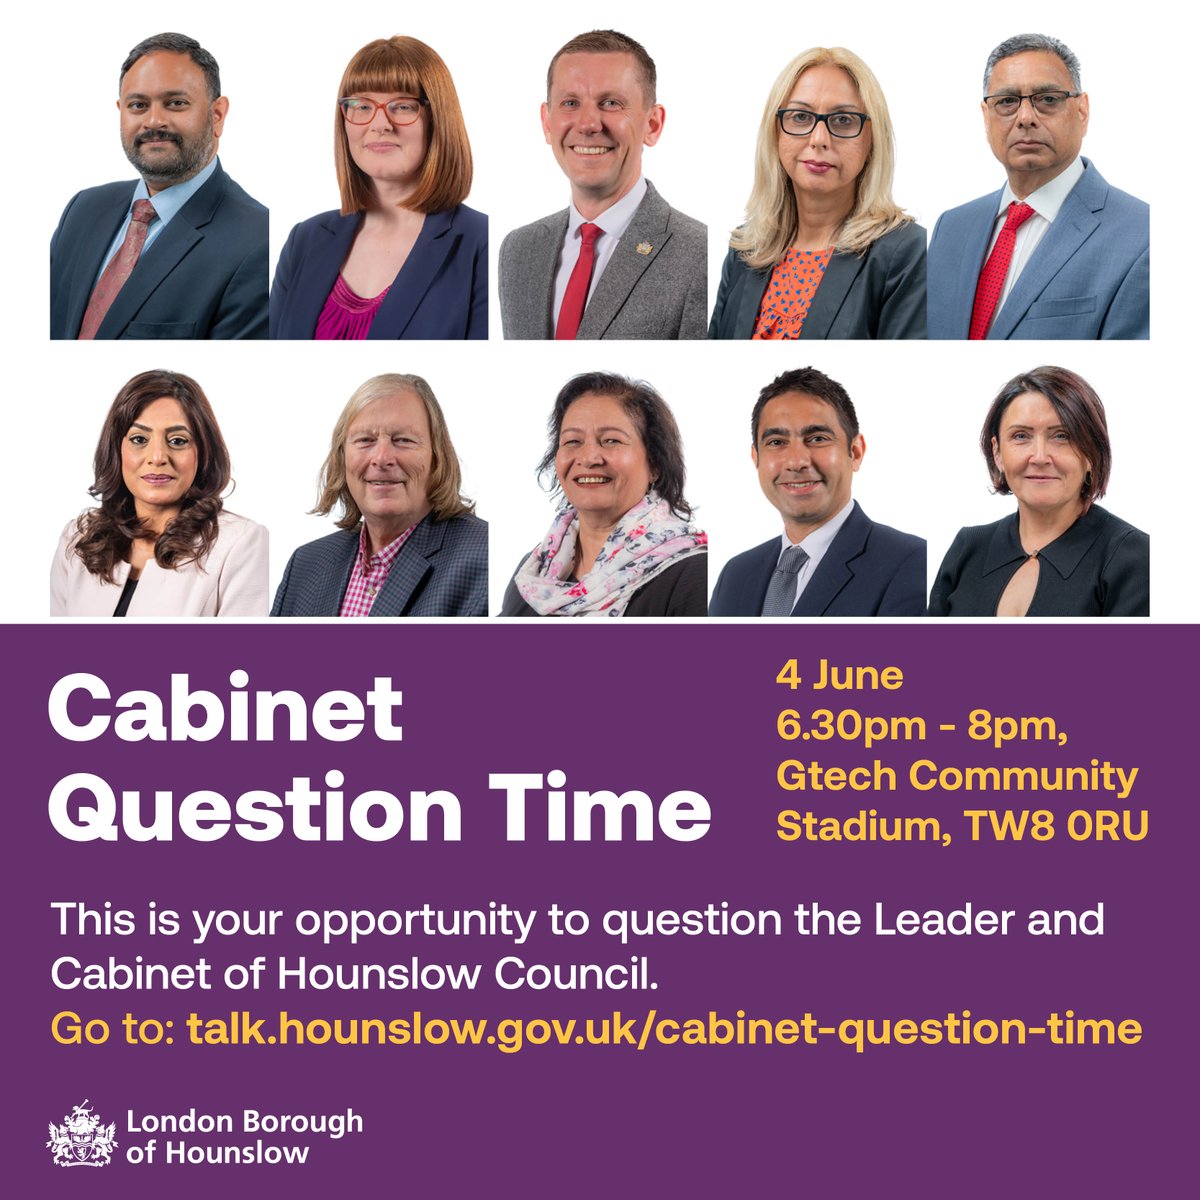 Cabinet Question Time is coming to the Gtech Community Stadium on 4 June - pose your questions to Hounslow Council's Cabinet and have your say. To submit questions online and to register your attendance for the event, please click the link below ⬇️ talk.hounslow.gov.uk/cabinet-questi…